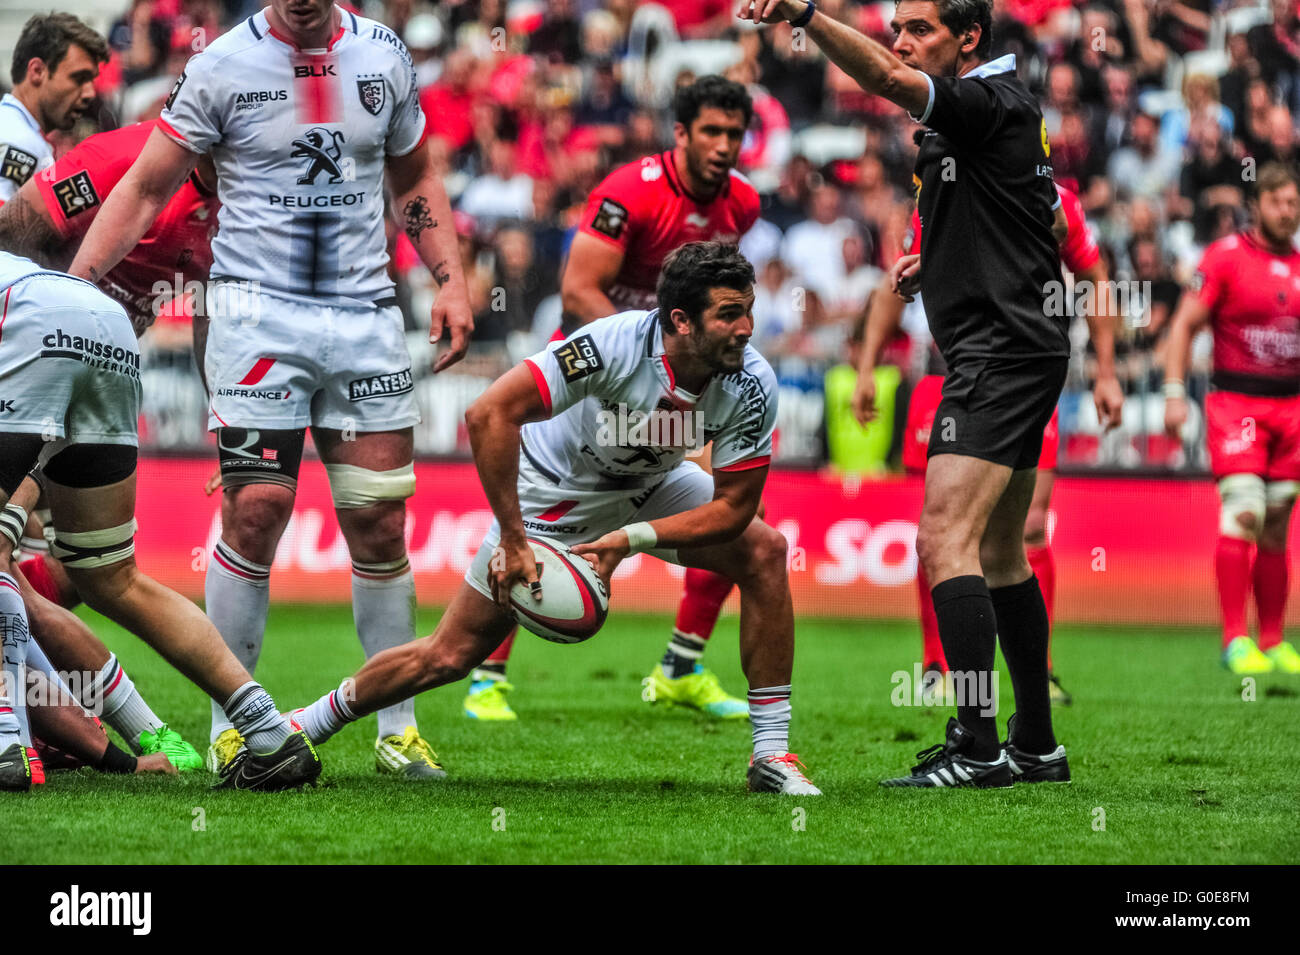 Nice, France. 30th Apr, 2016. Sebastien Bezy. French Top 14 rugby union.  Match between RC Toulon and Stade Toulousain ( Toulouse ) at Allianz  Riviera on April 30, 2016 in Nice, France.